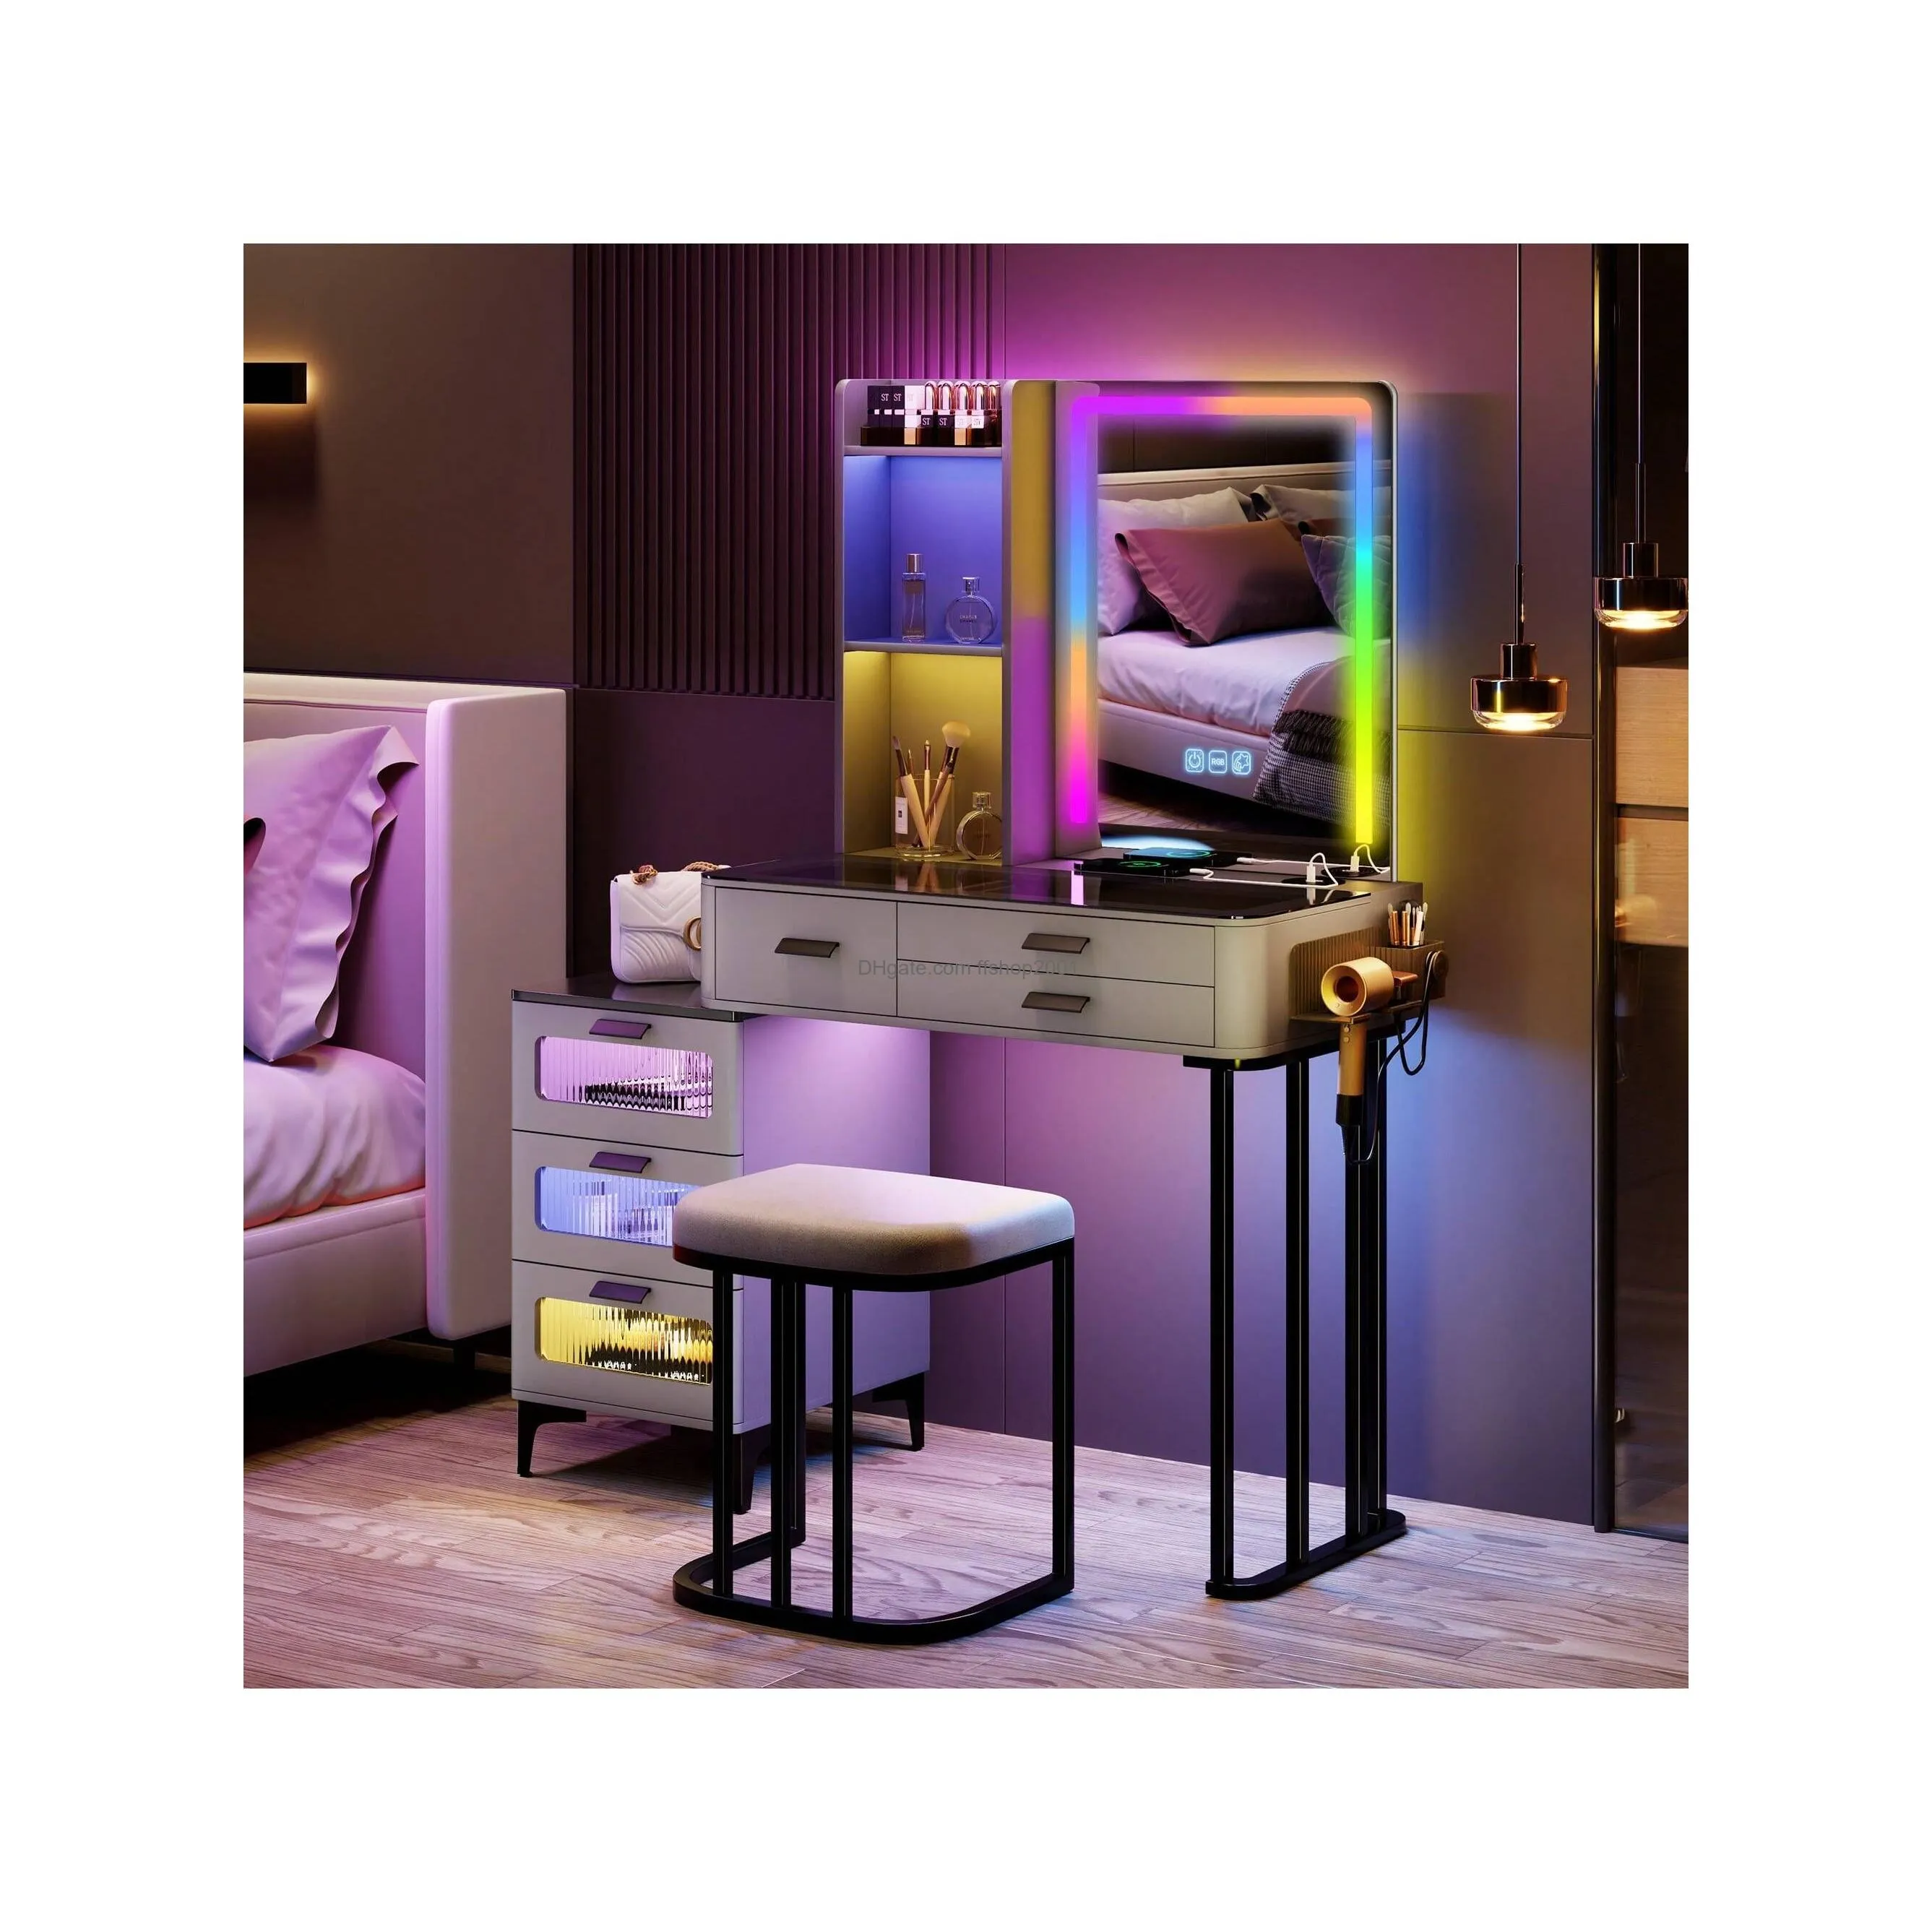 kasibie rgb led light dresser set gorgeous glass top and hairdryer holder usb and wireless charging dresser has 6 drawers open storage